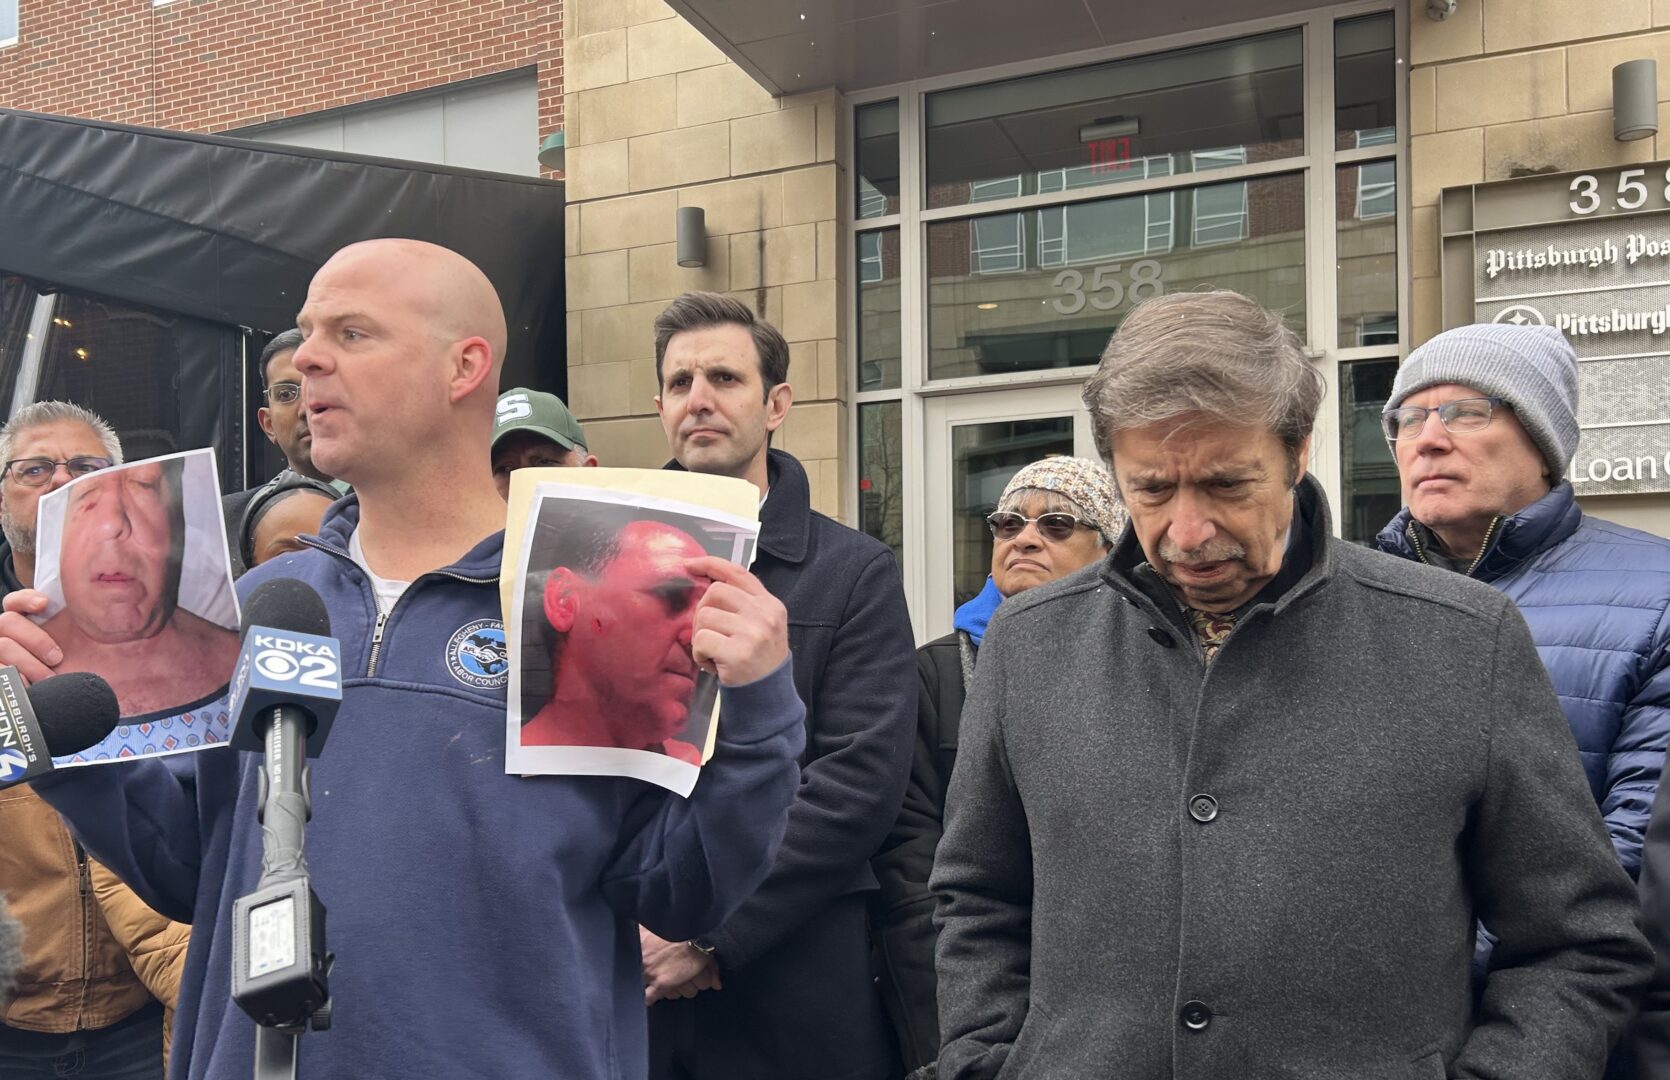 Standing alongside Democratic elected officials, Allegheny County Labor Council President Darrin Kelly calls on local authorities to investigate a punching incident outside the Post-Gazette's South Side distribution facility Saturday night.
